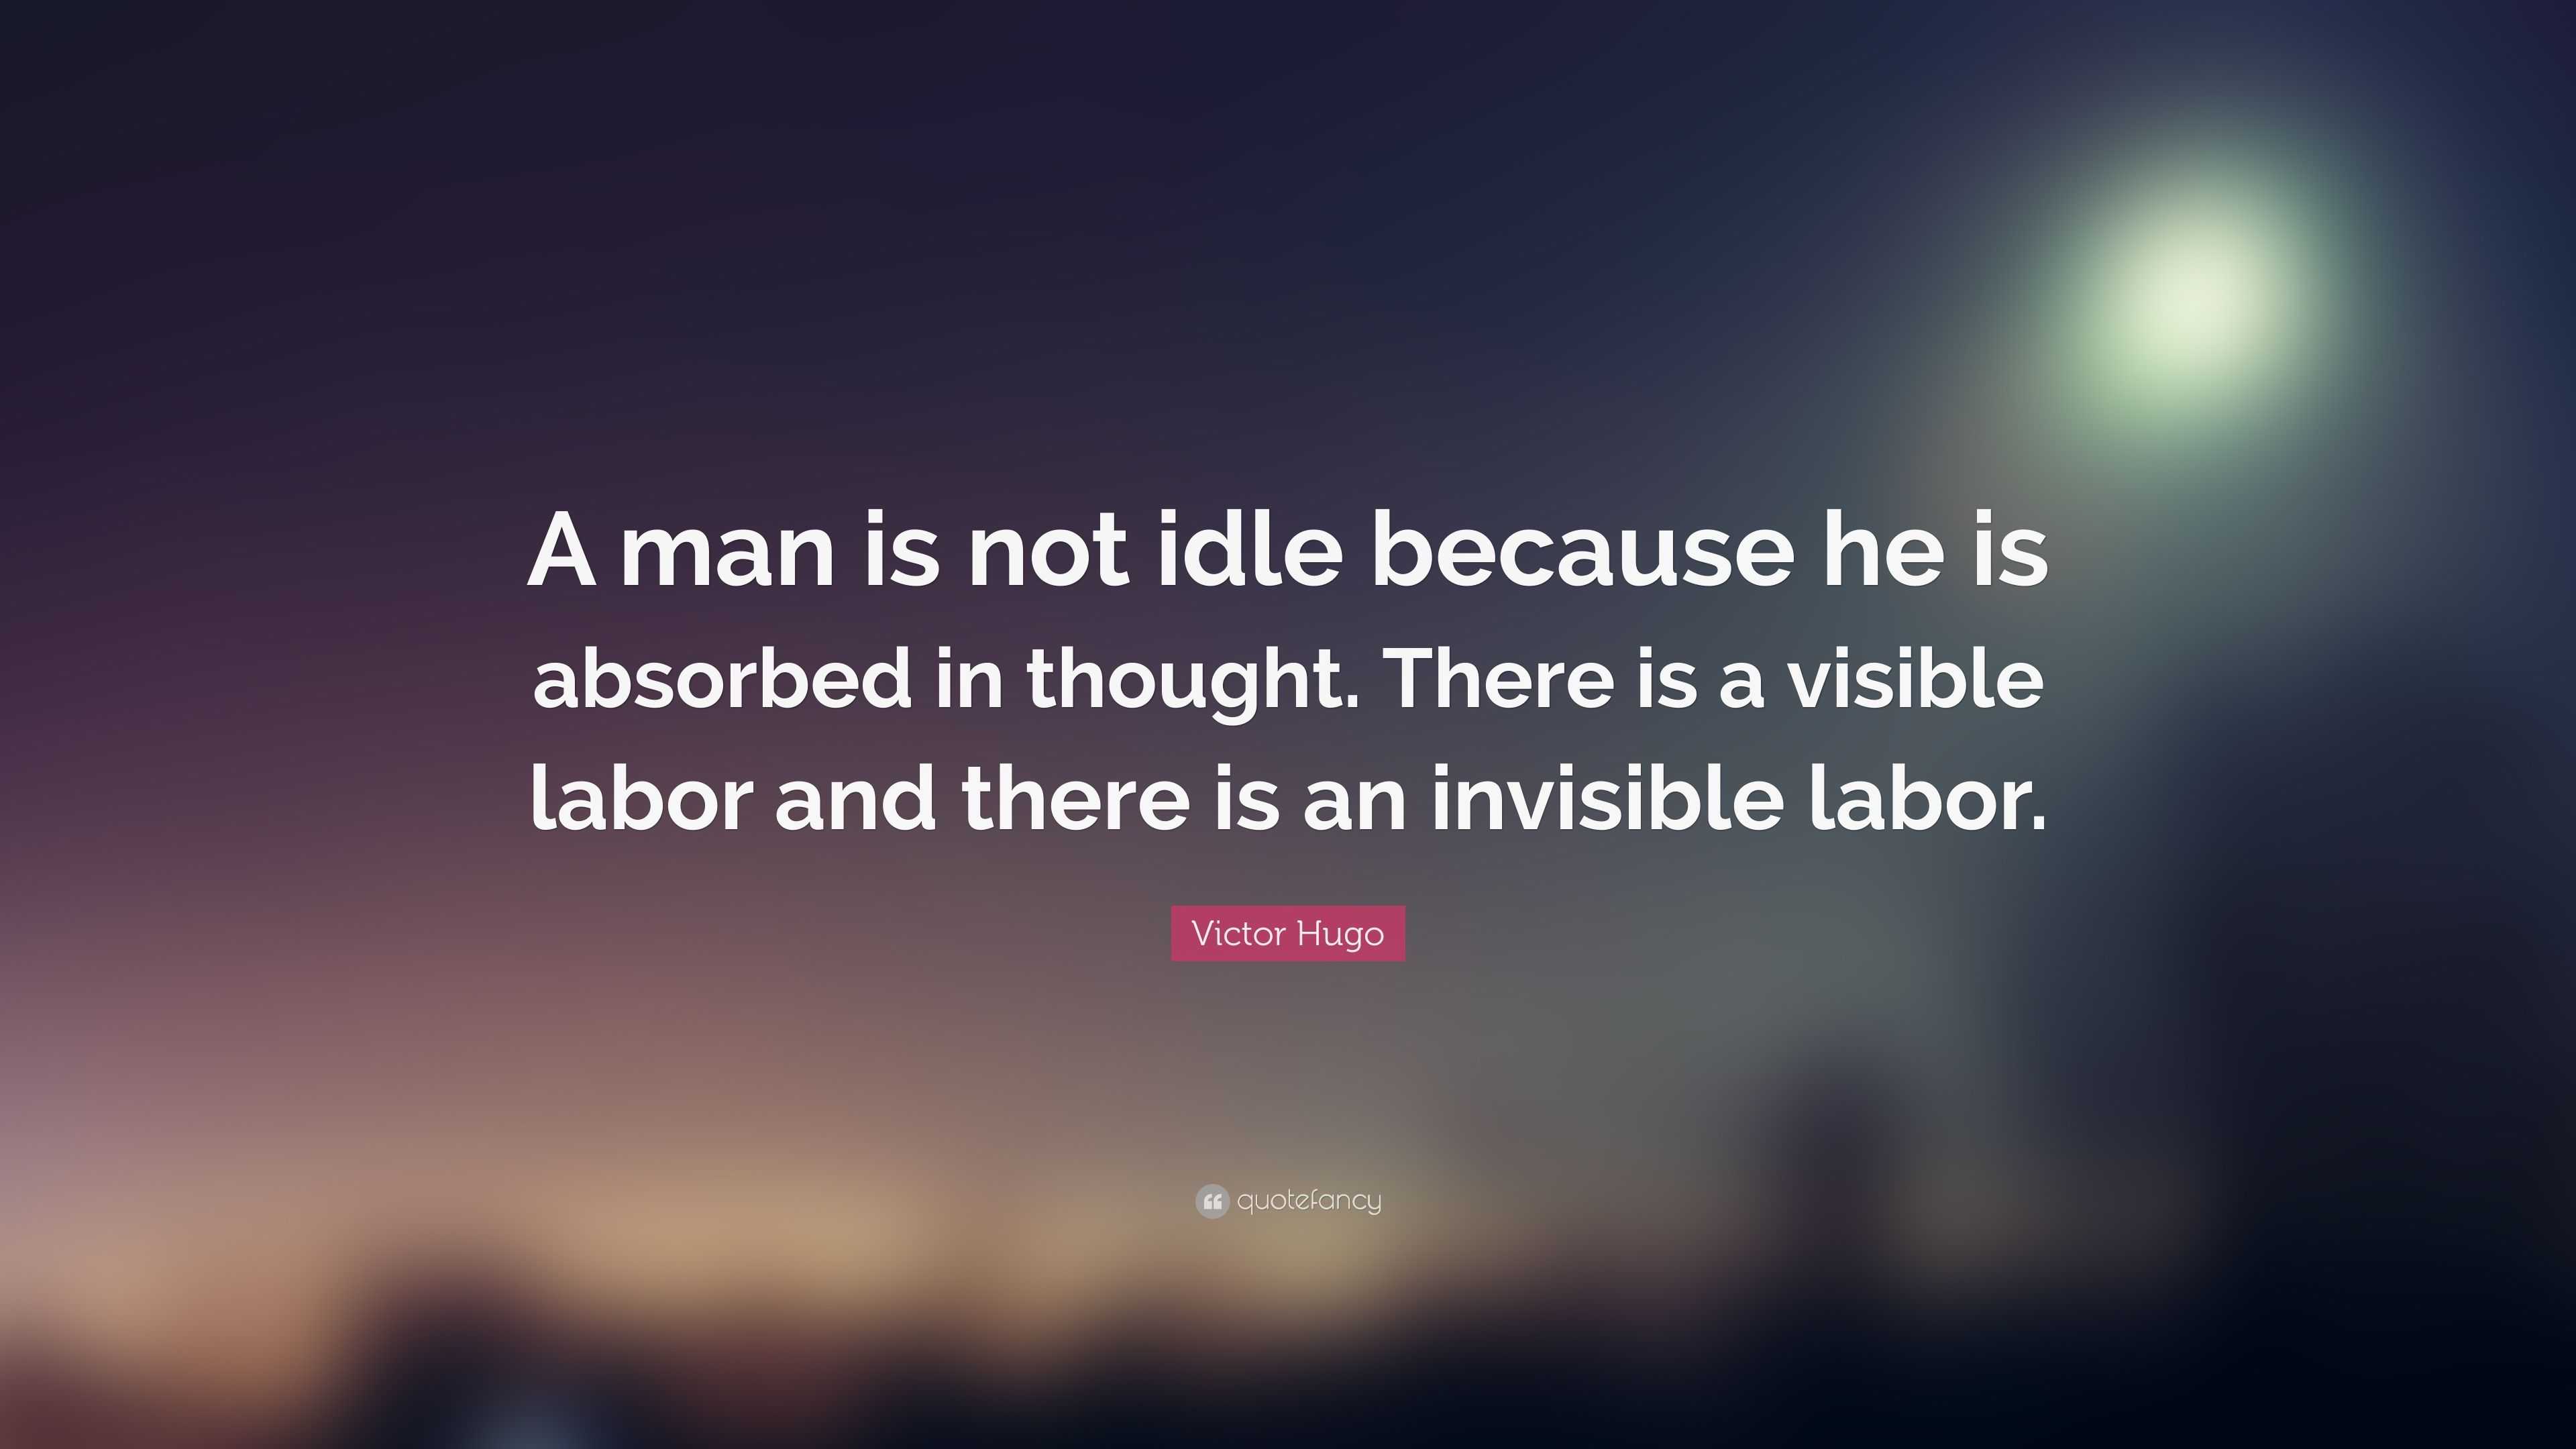 Victor Hugo Quote: “A man is not idle because he is absorbed in thought.  There is